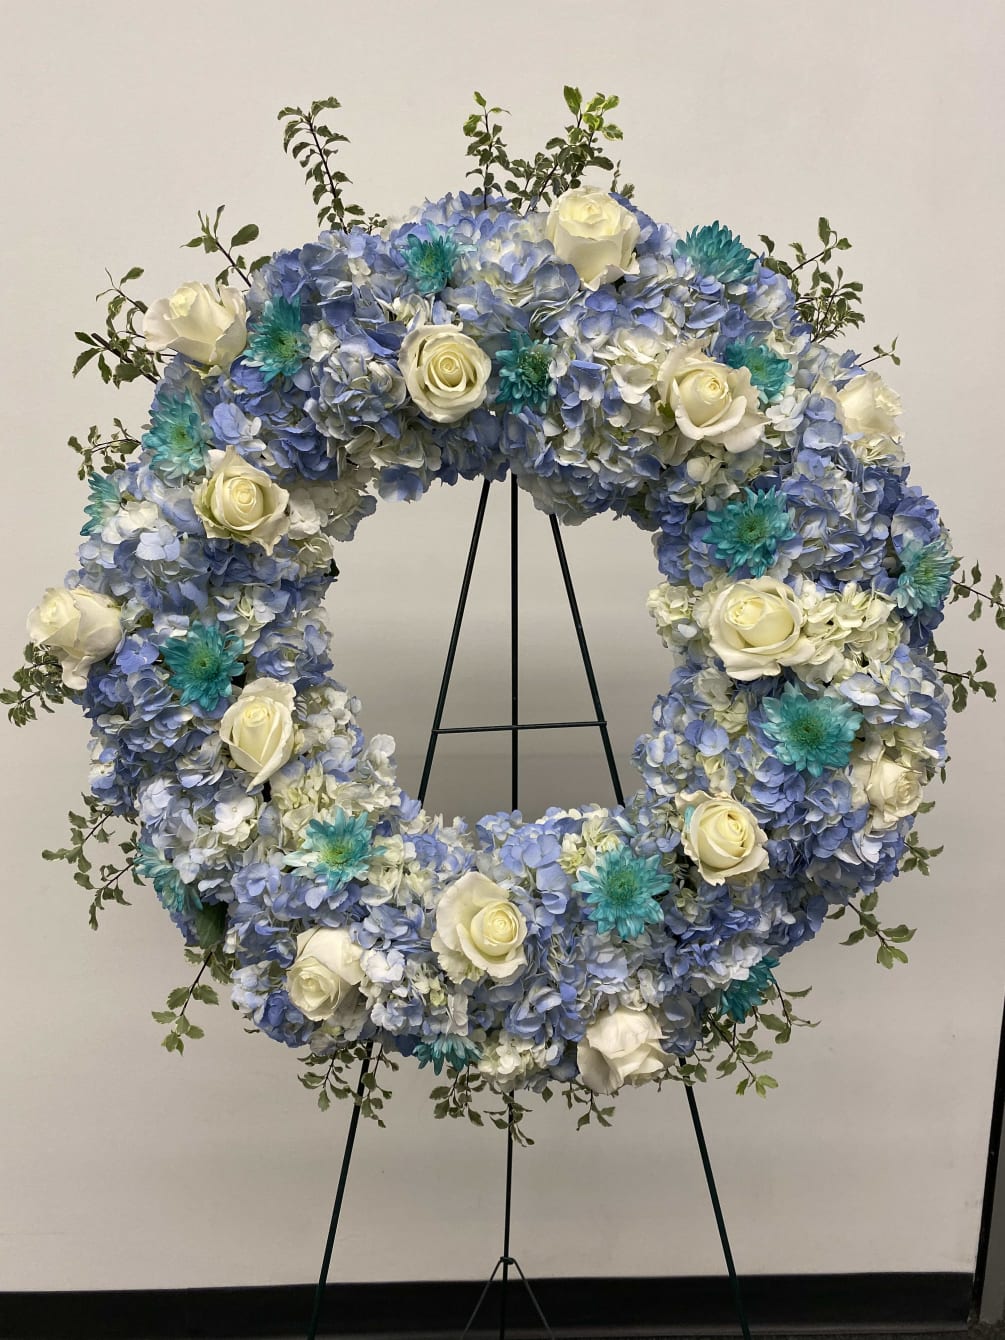 Very large wreath of hydrangeas, roses and greenery. Colors are Light blue